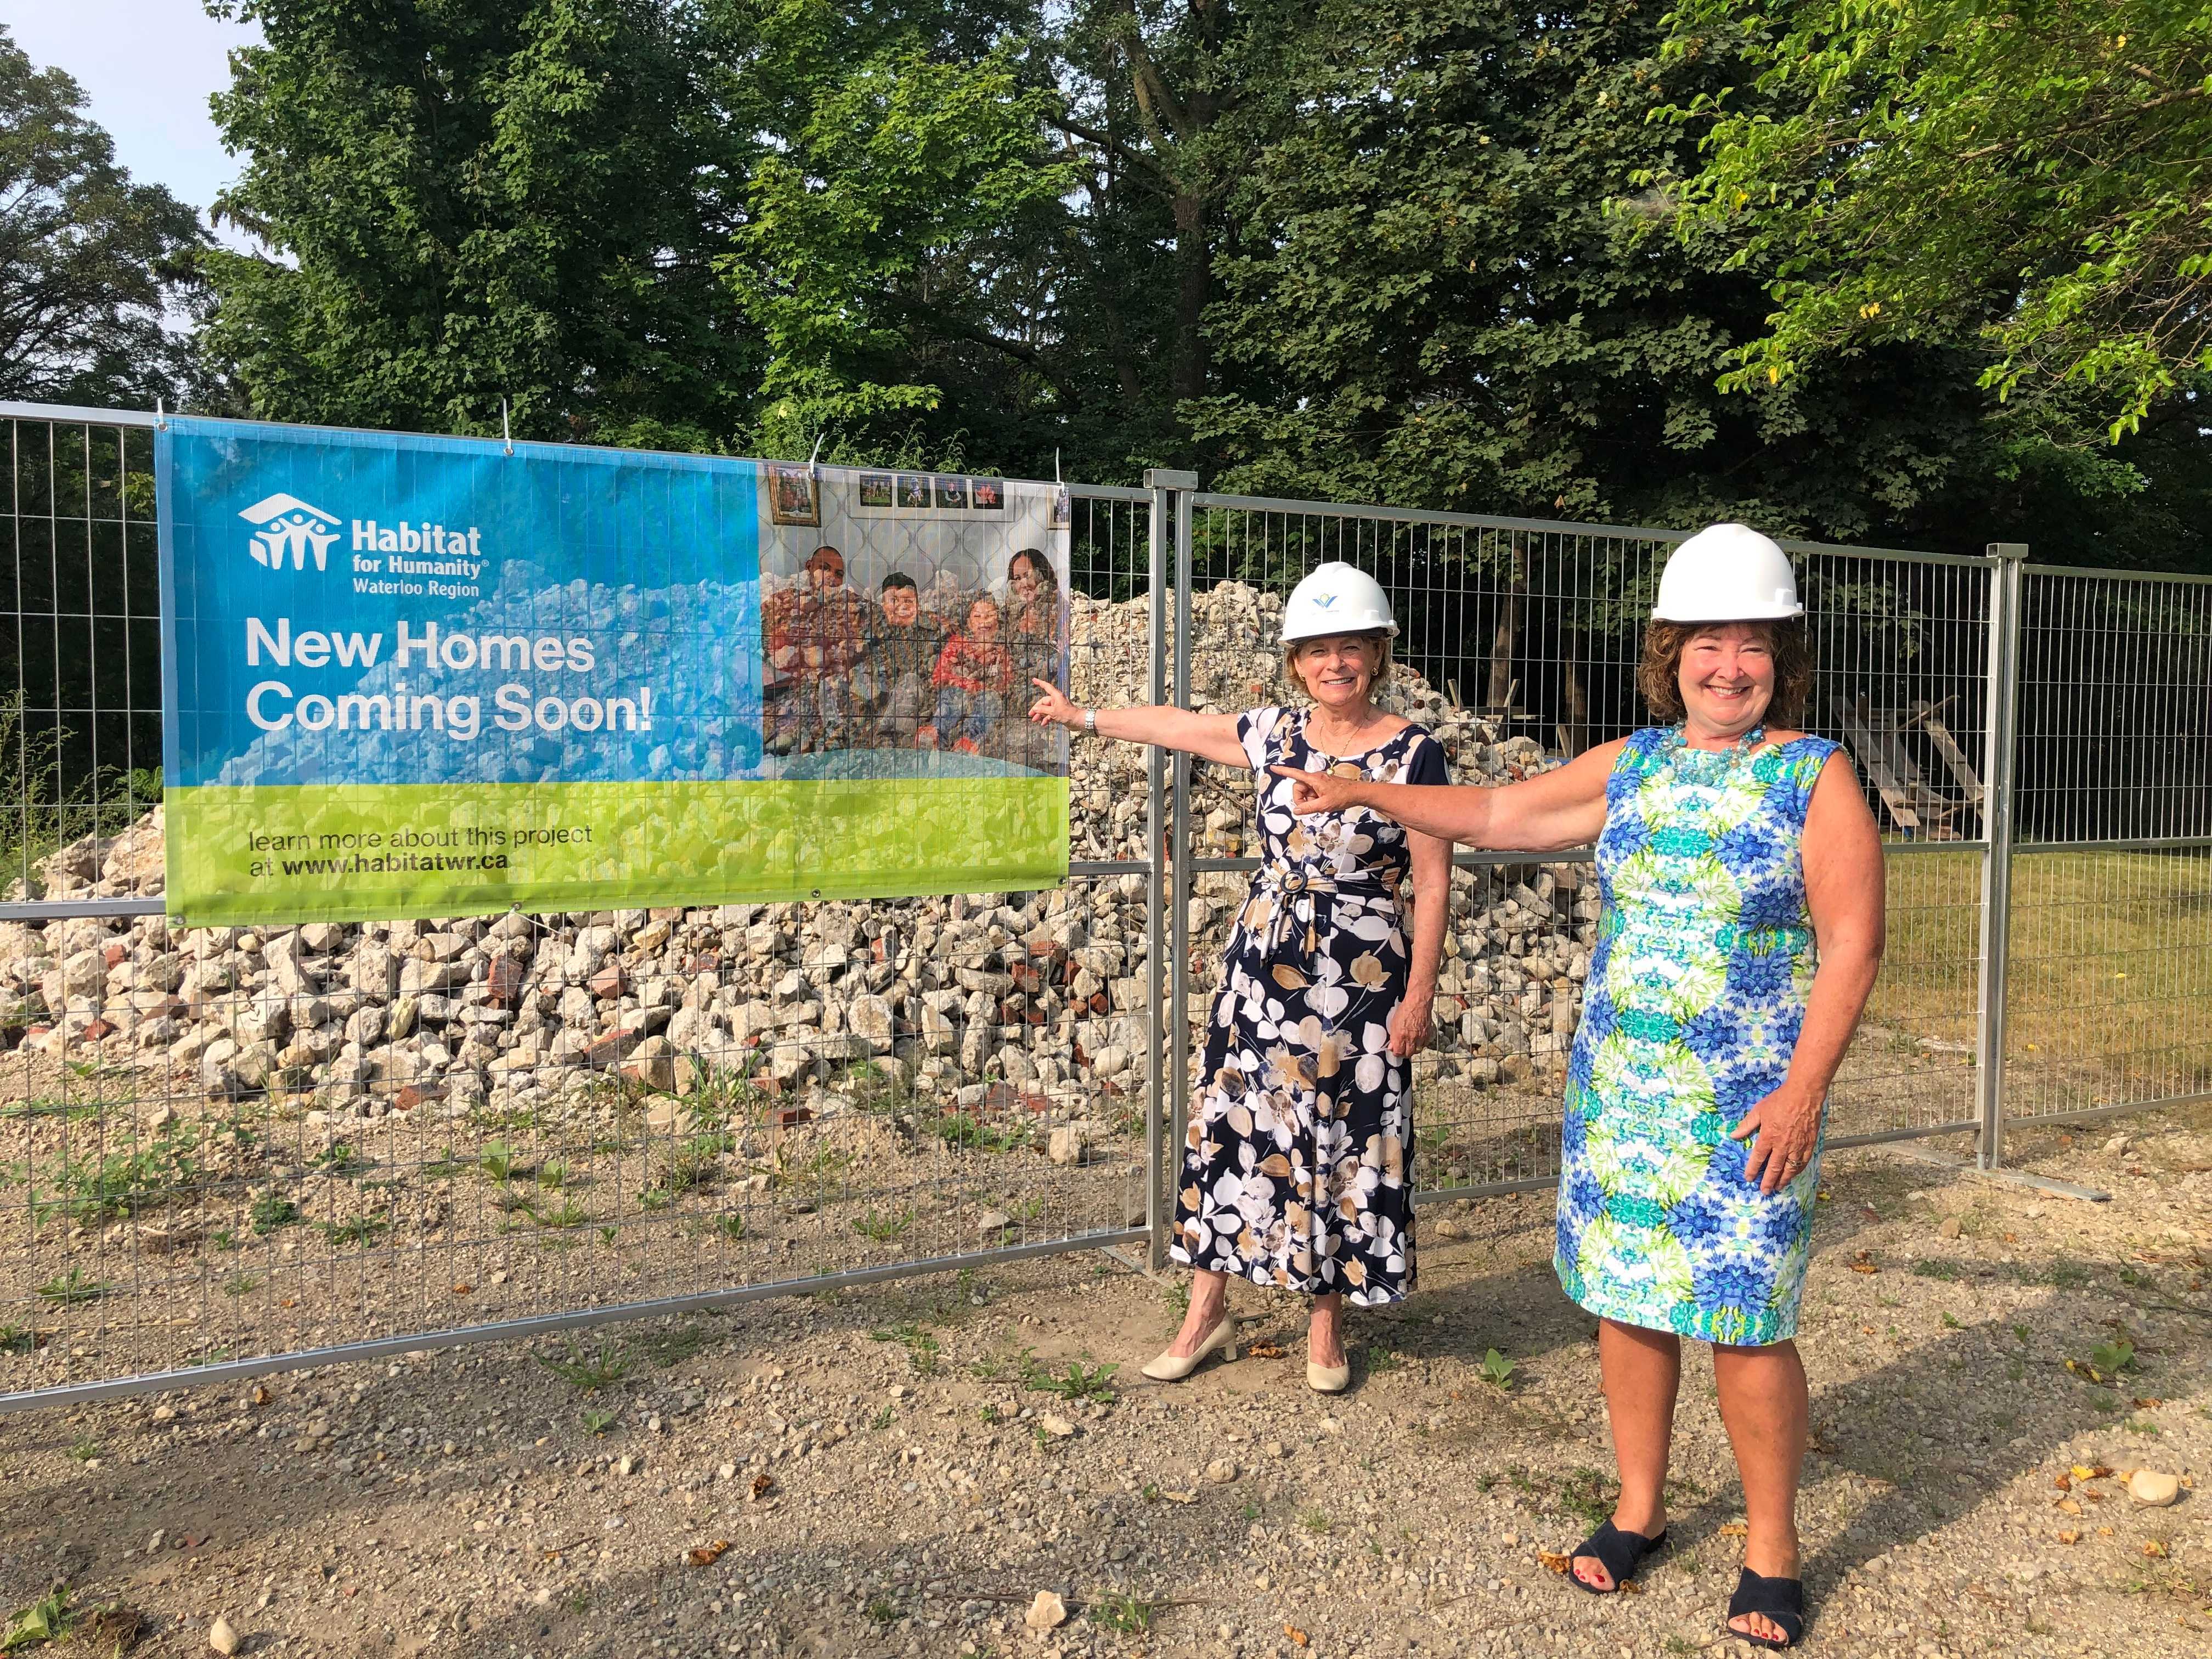 Regional Chair Karen Redman and Cambridge Mayor Kathryn McGarry are excited to announce the future build of a brand-new affordable housing community for families in Cambridge